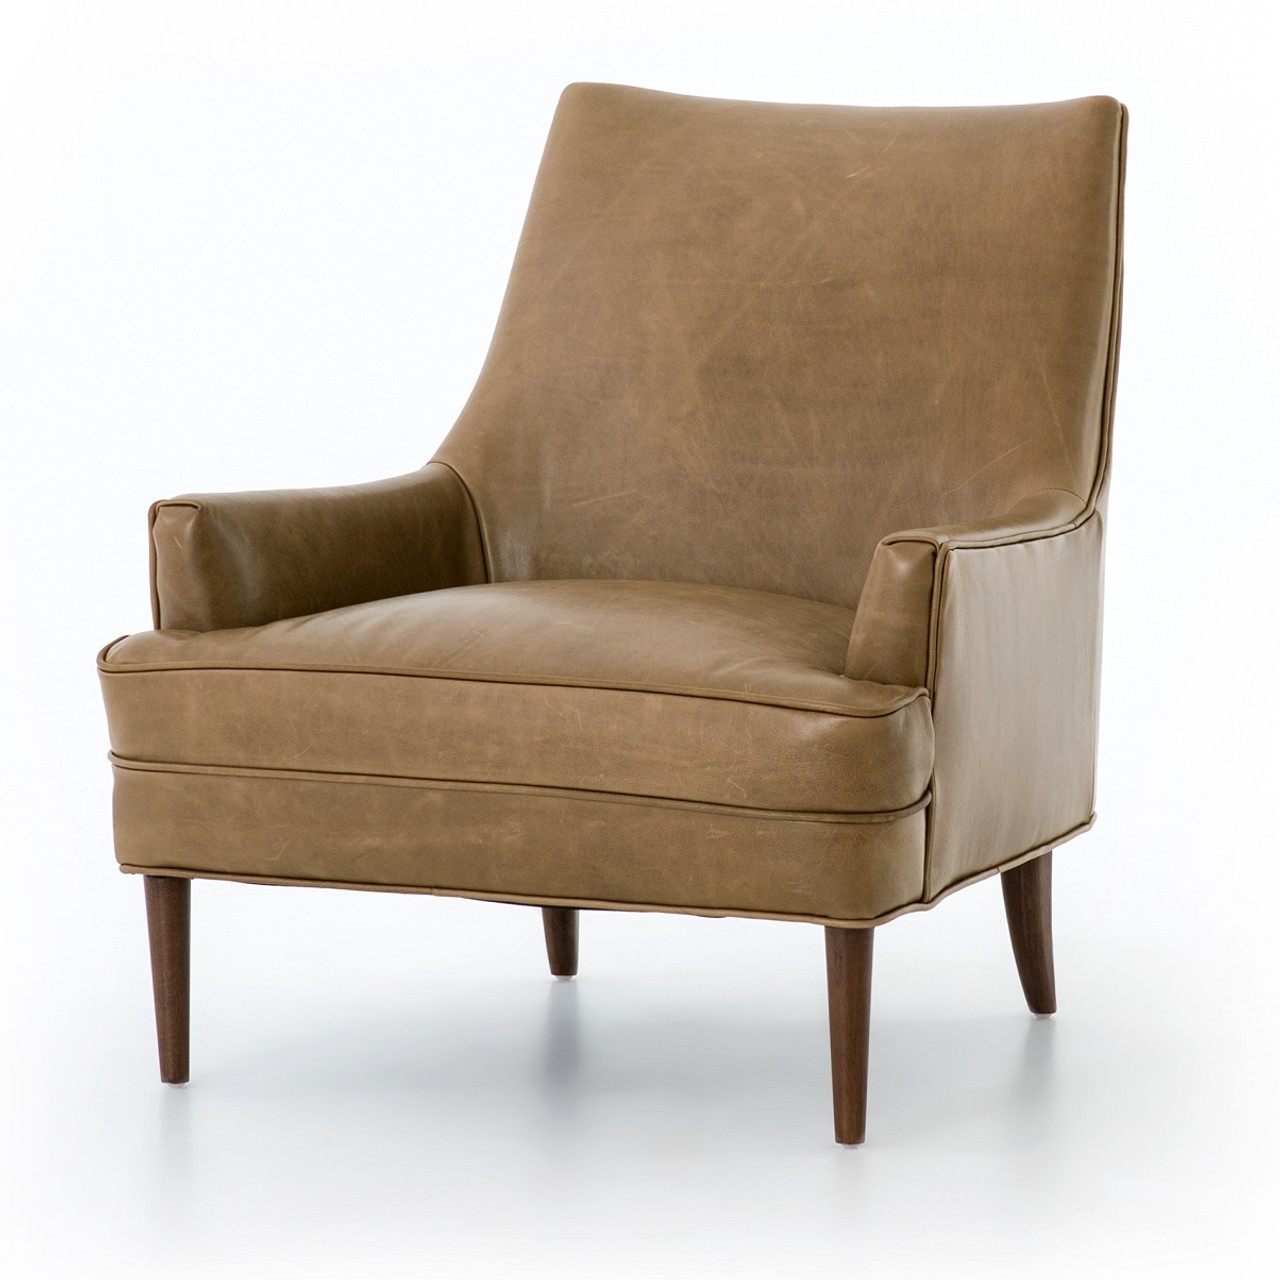 Danya MidCentury Modern Taupe Leather Accent Chair Zin Home